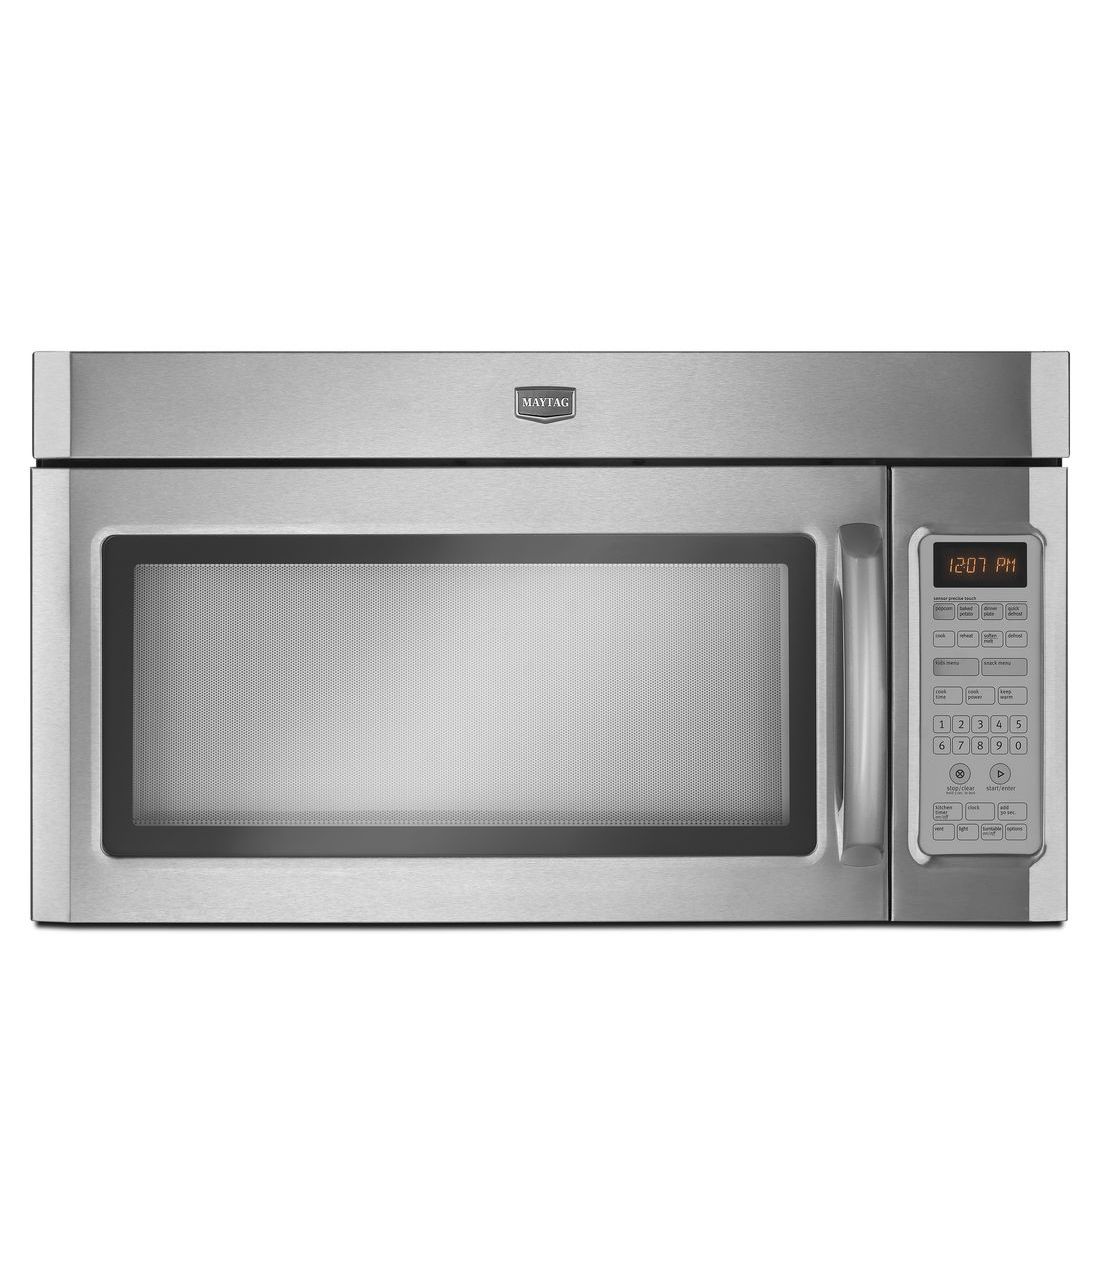 Maytag MMV4206BS 2.0 cu. ft. OverTheRange Microwave with 1000 Watts, 10 Power Levels, Hidden